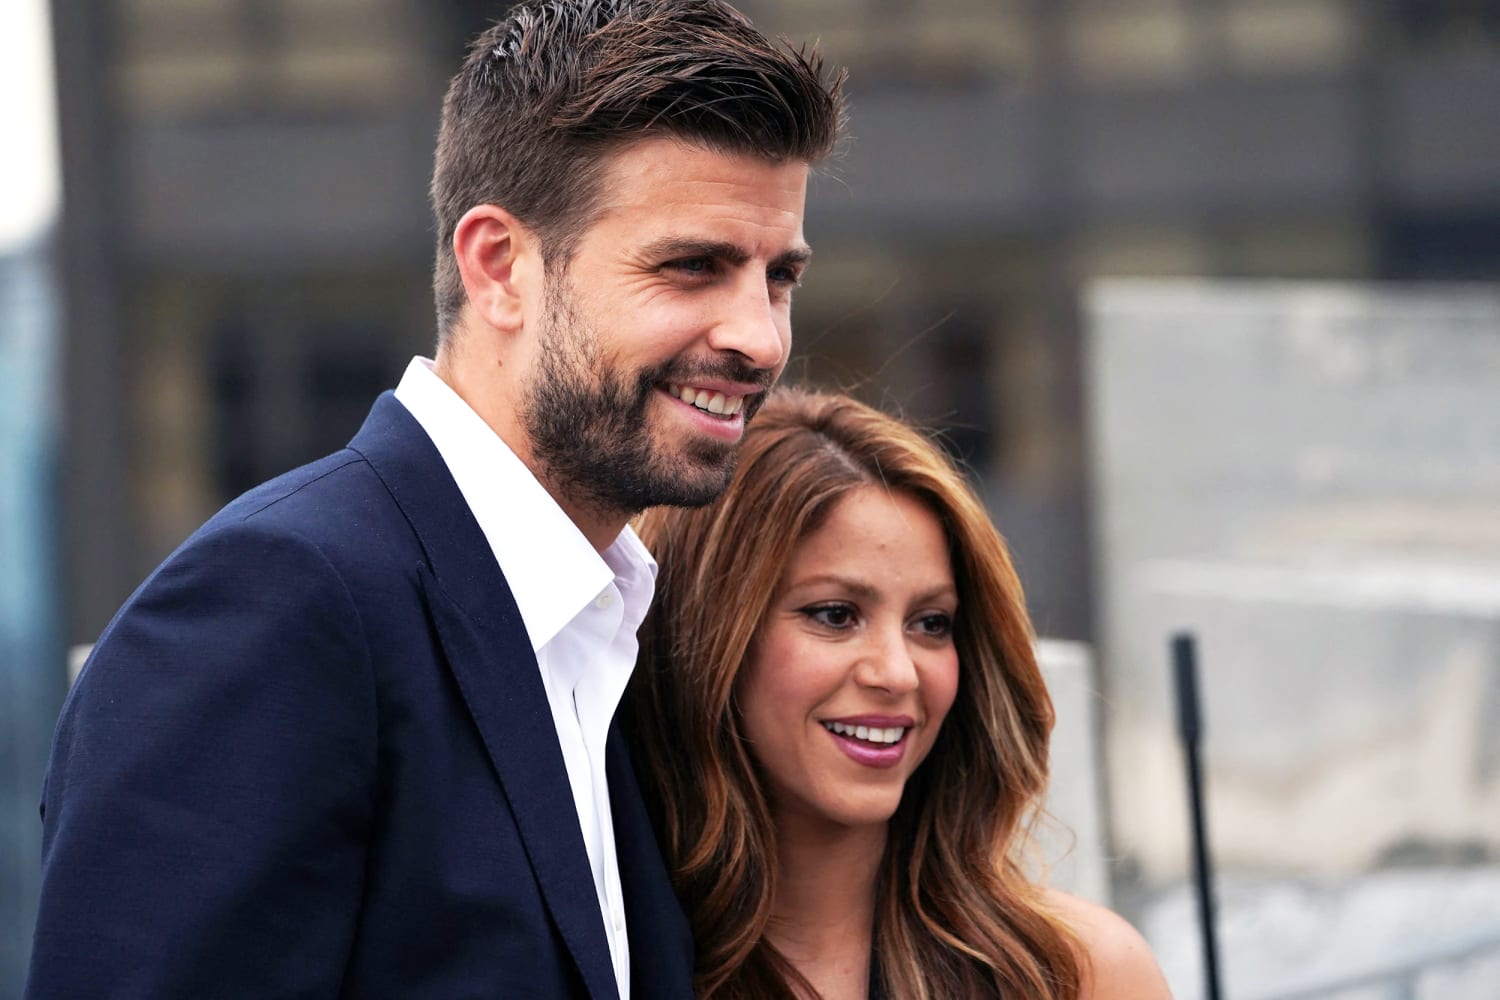 Shakira and Gerard Piqué separating after 11 years together